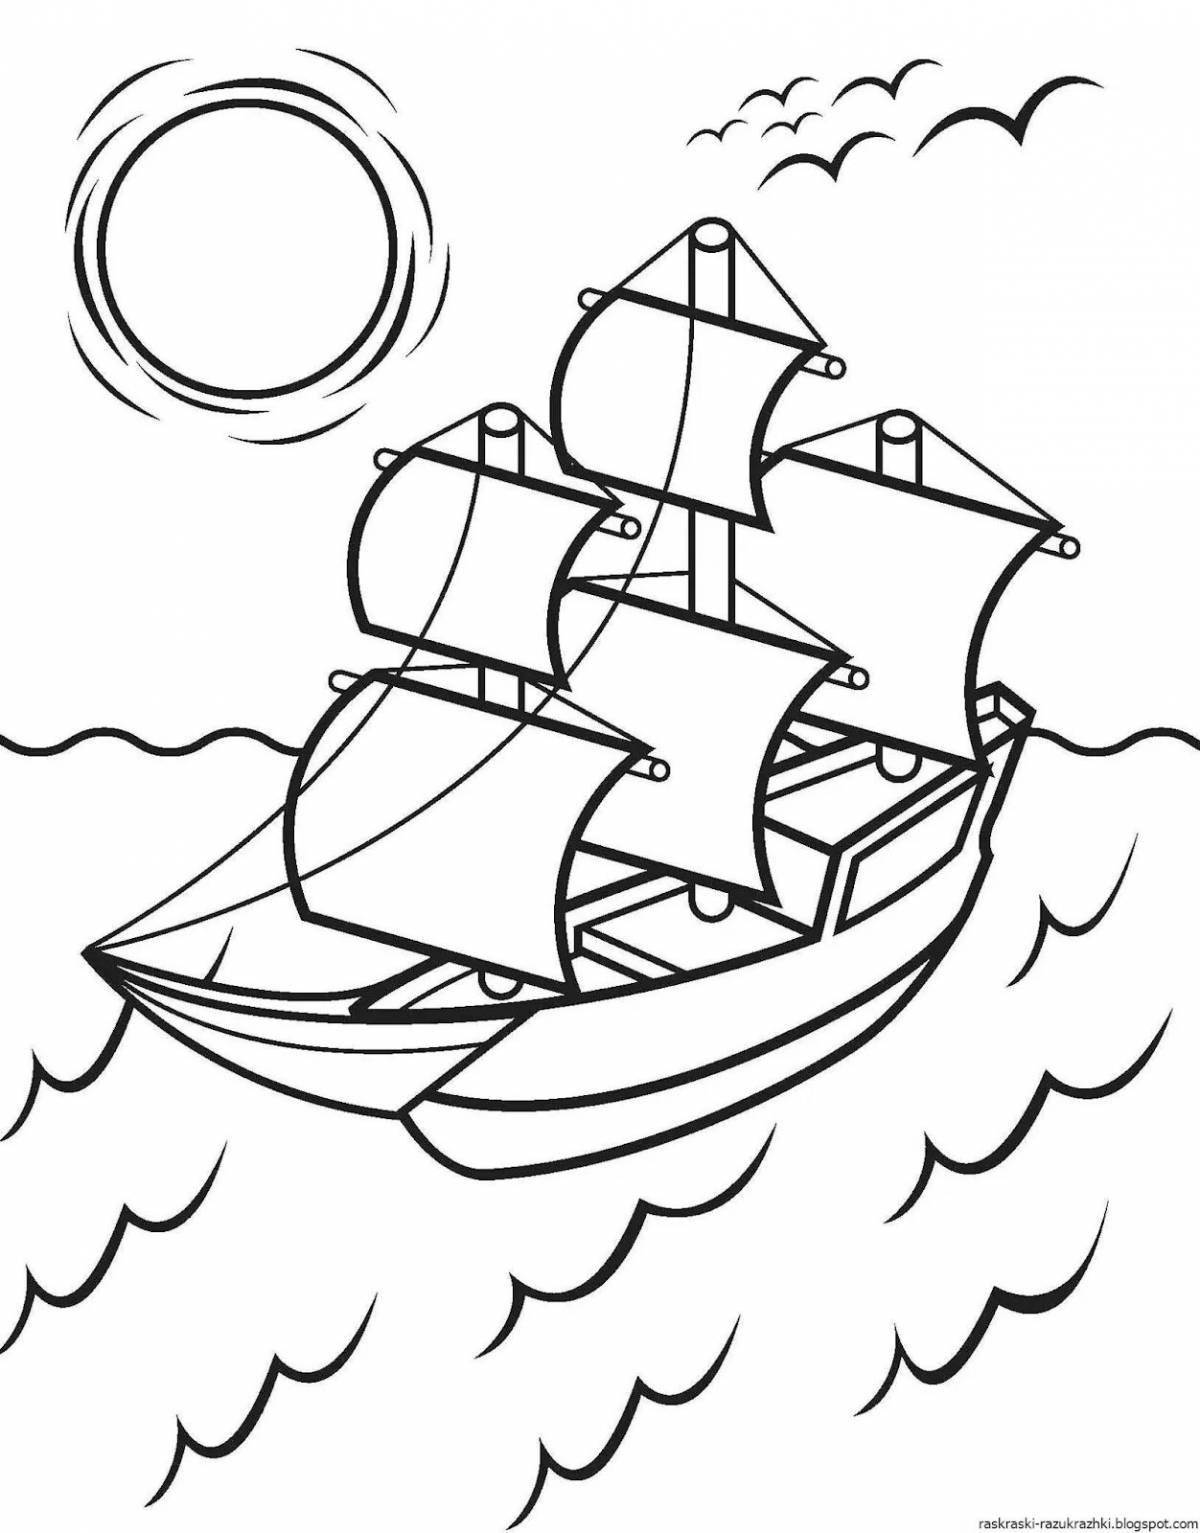 Exquisite ship coloring book for 7 year olds